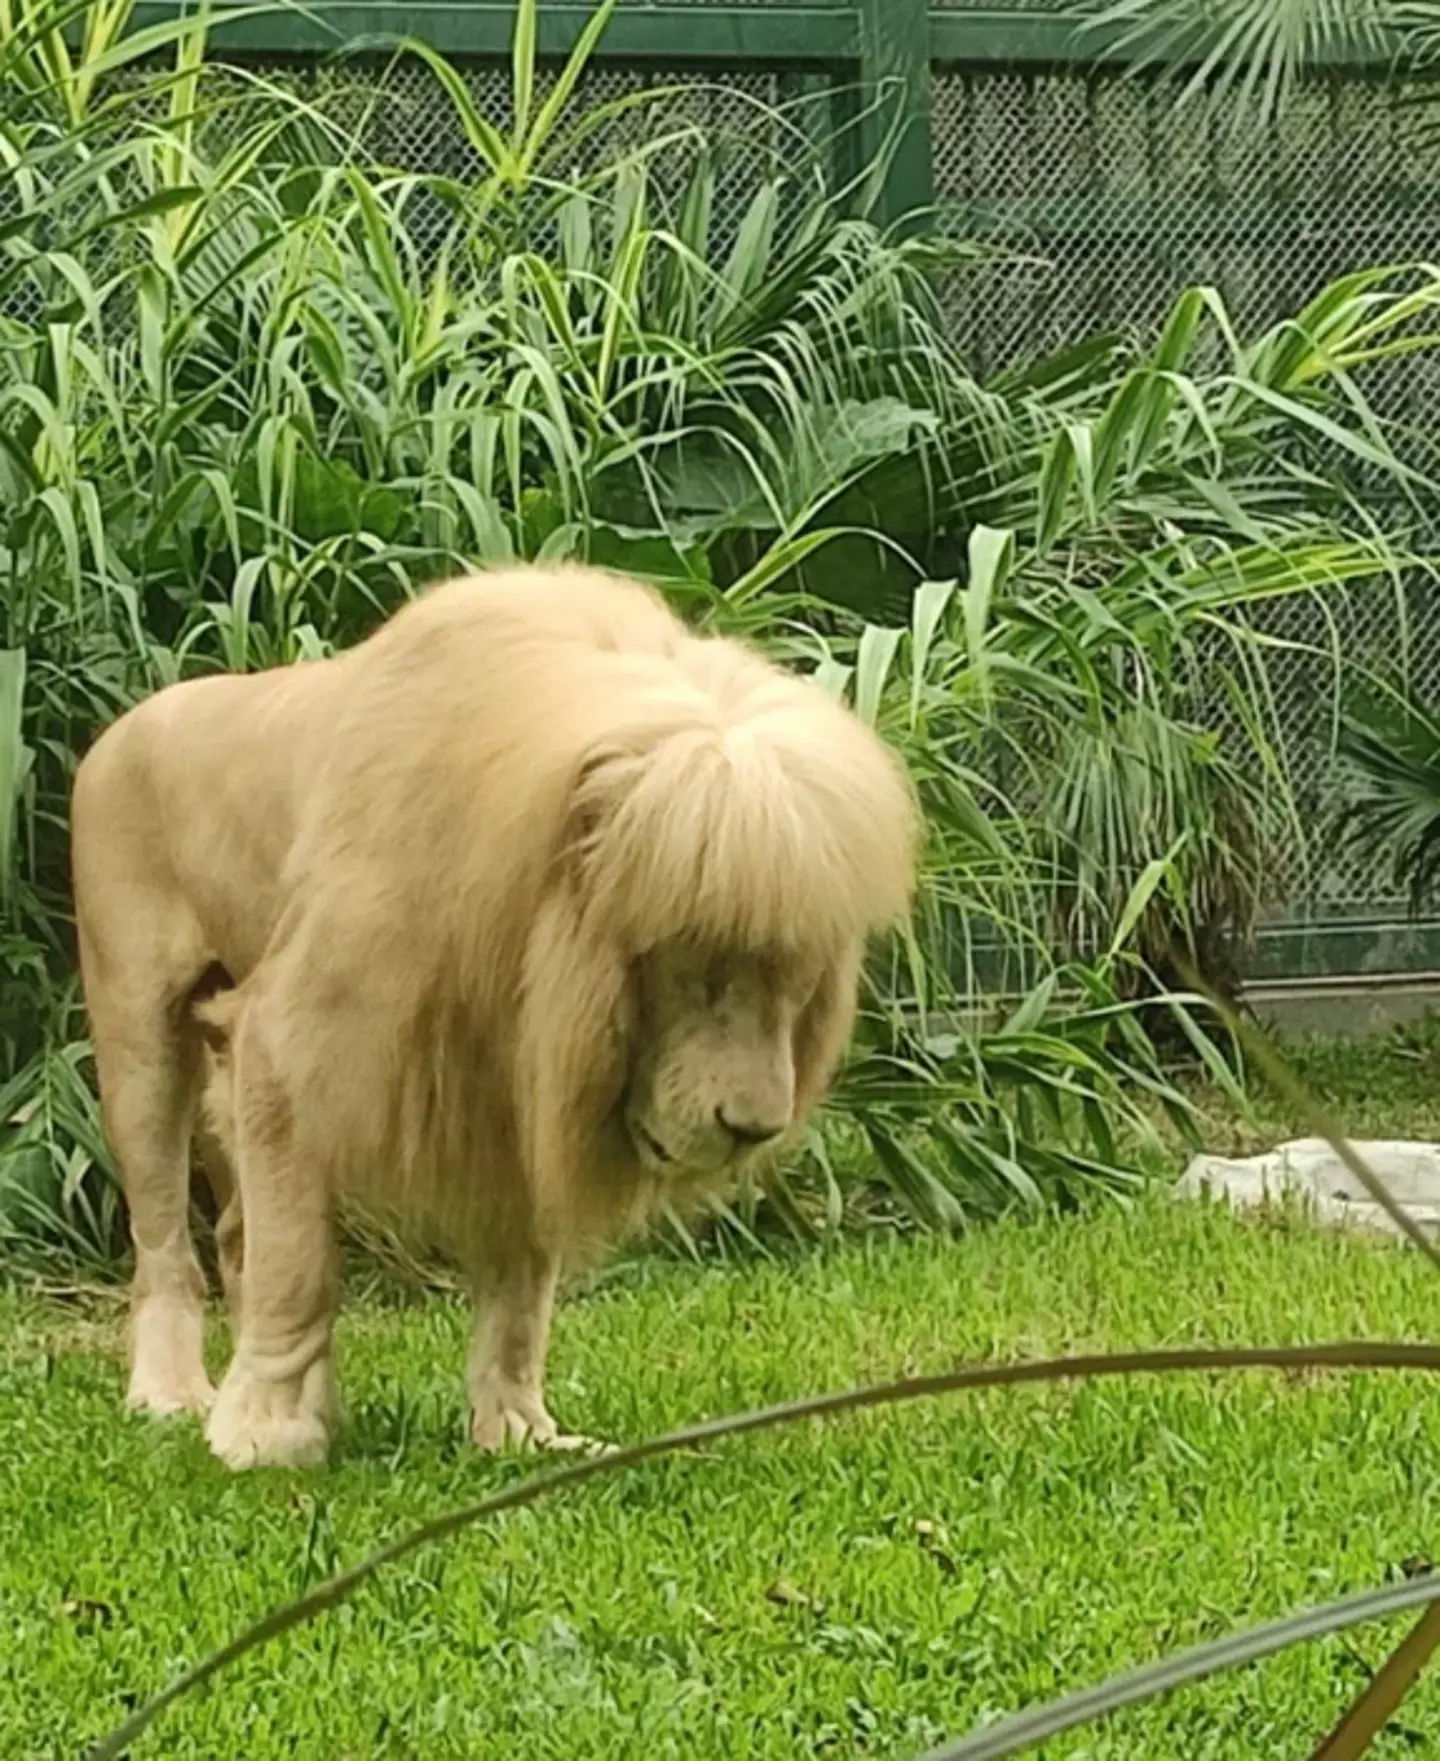 The zookeepers suggested that it was the high humidity that caused the lion's mane to hang downwards.